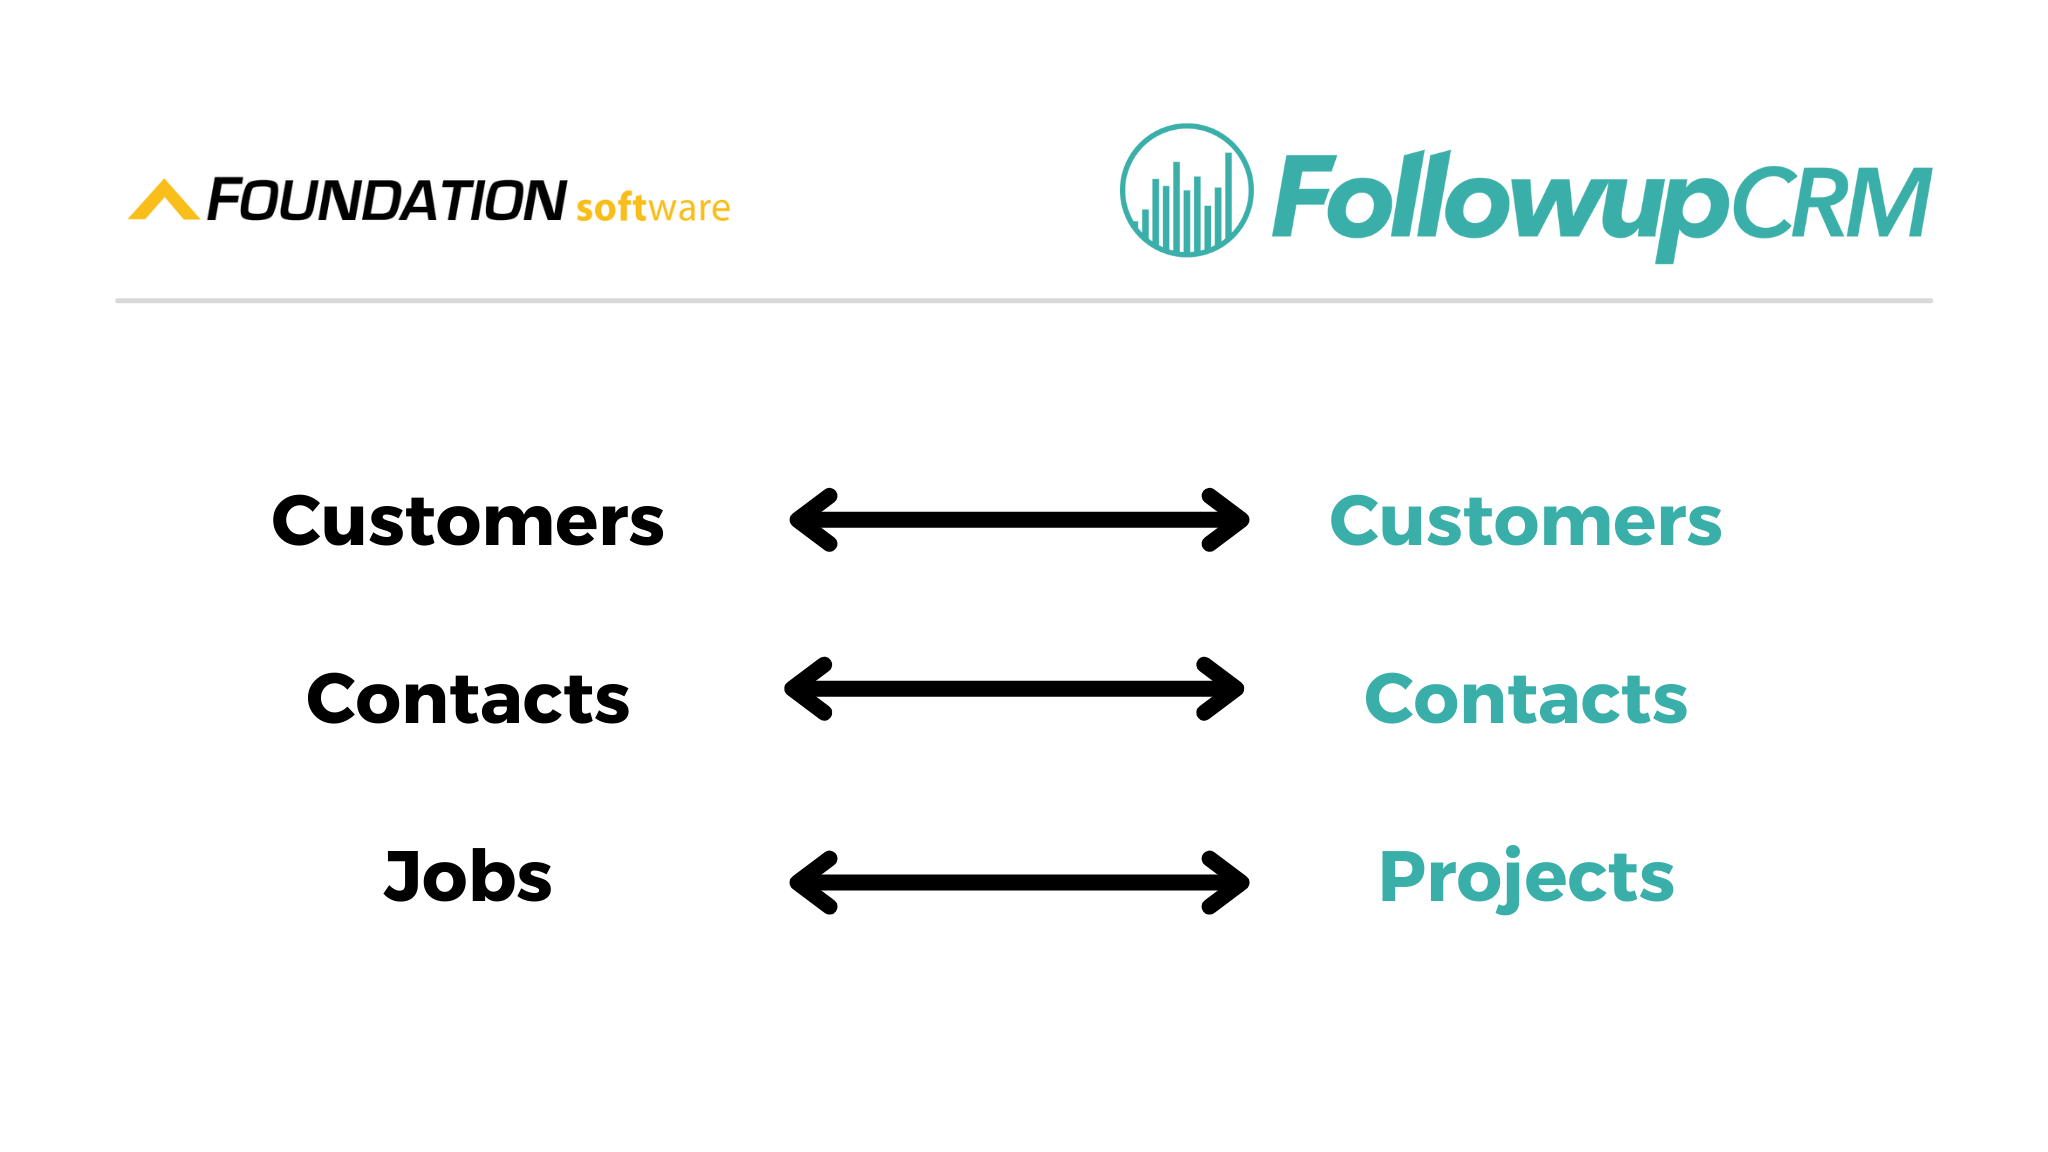 Followup CRM And The Foundation Integration